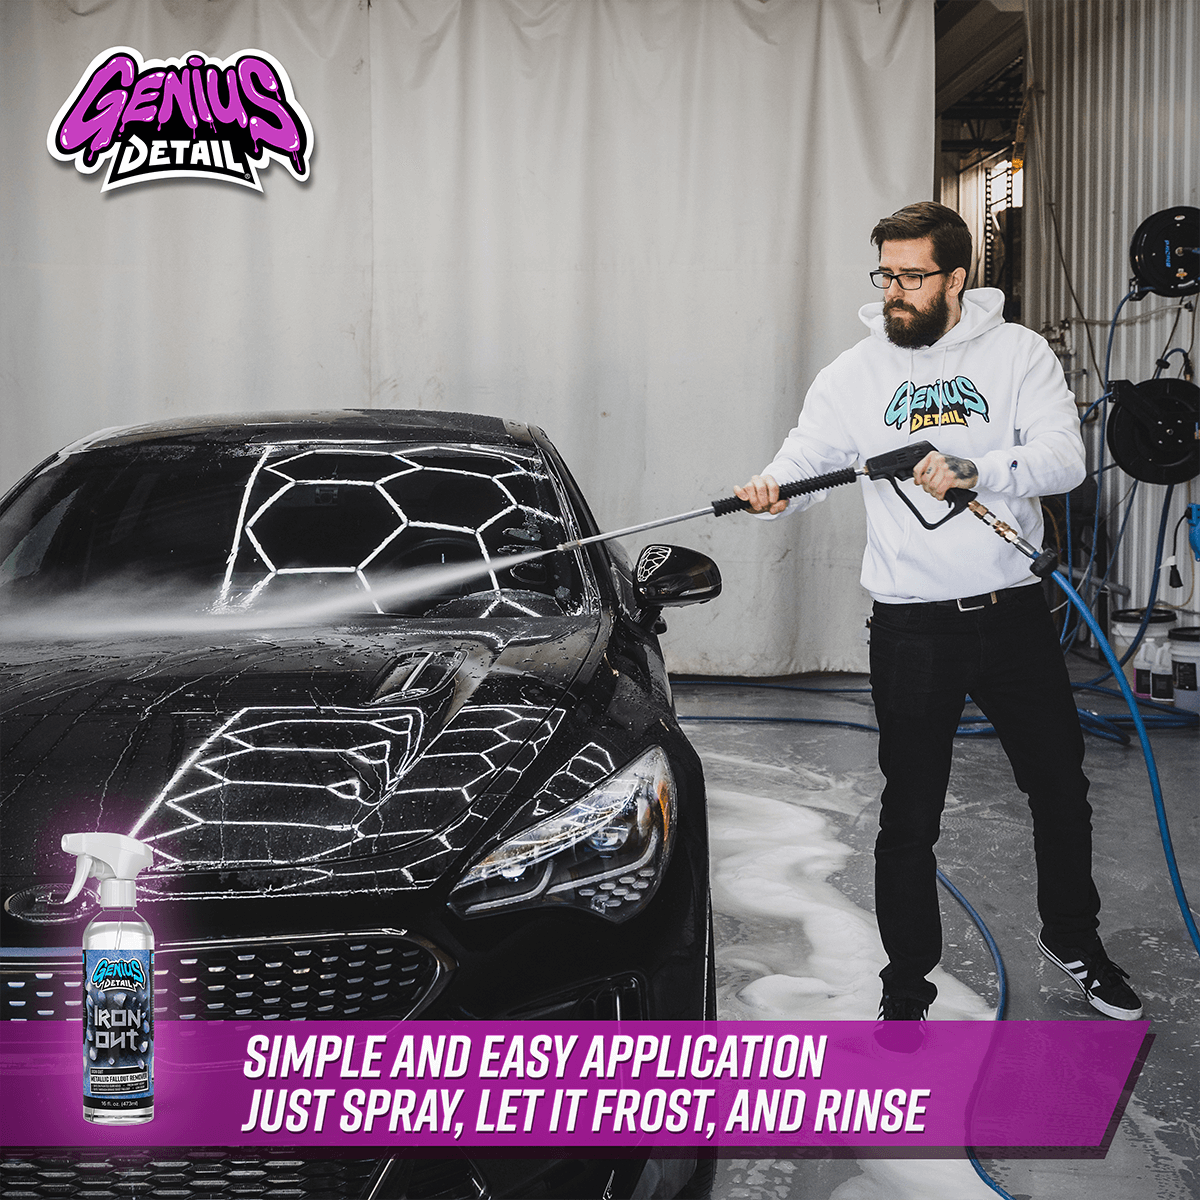 GetUSCart- Adam's Iron Remover Gallon - Fallout Iron Out Rust Stain Remover  Spray For Pro Car Detailing